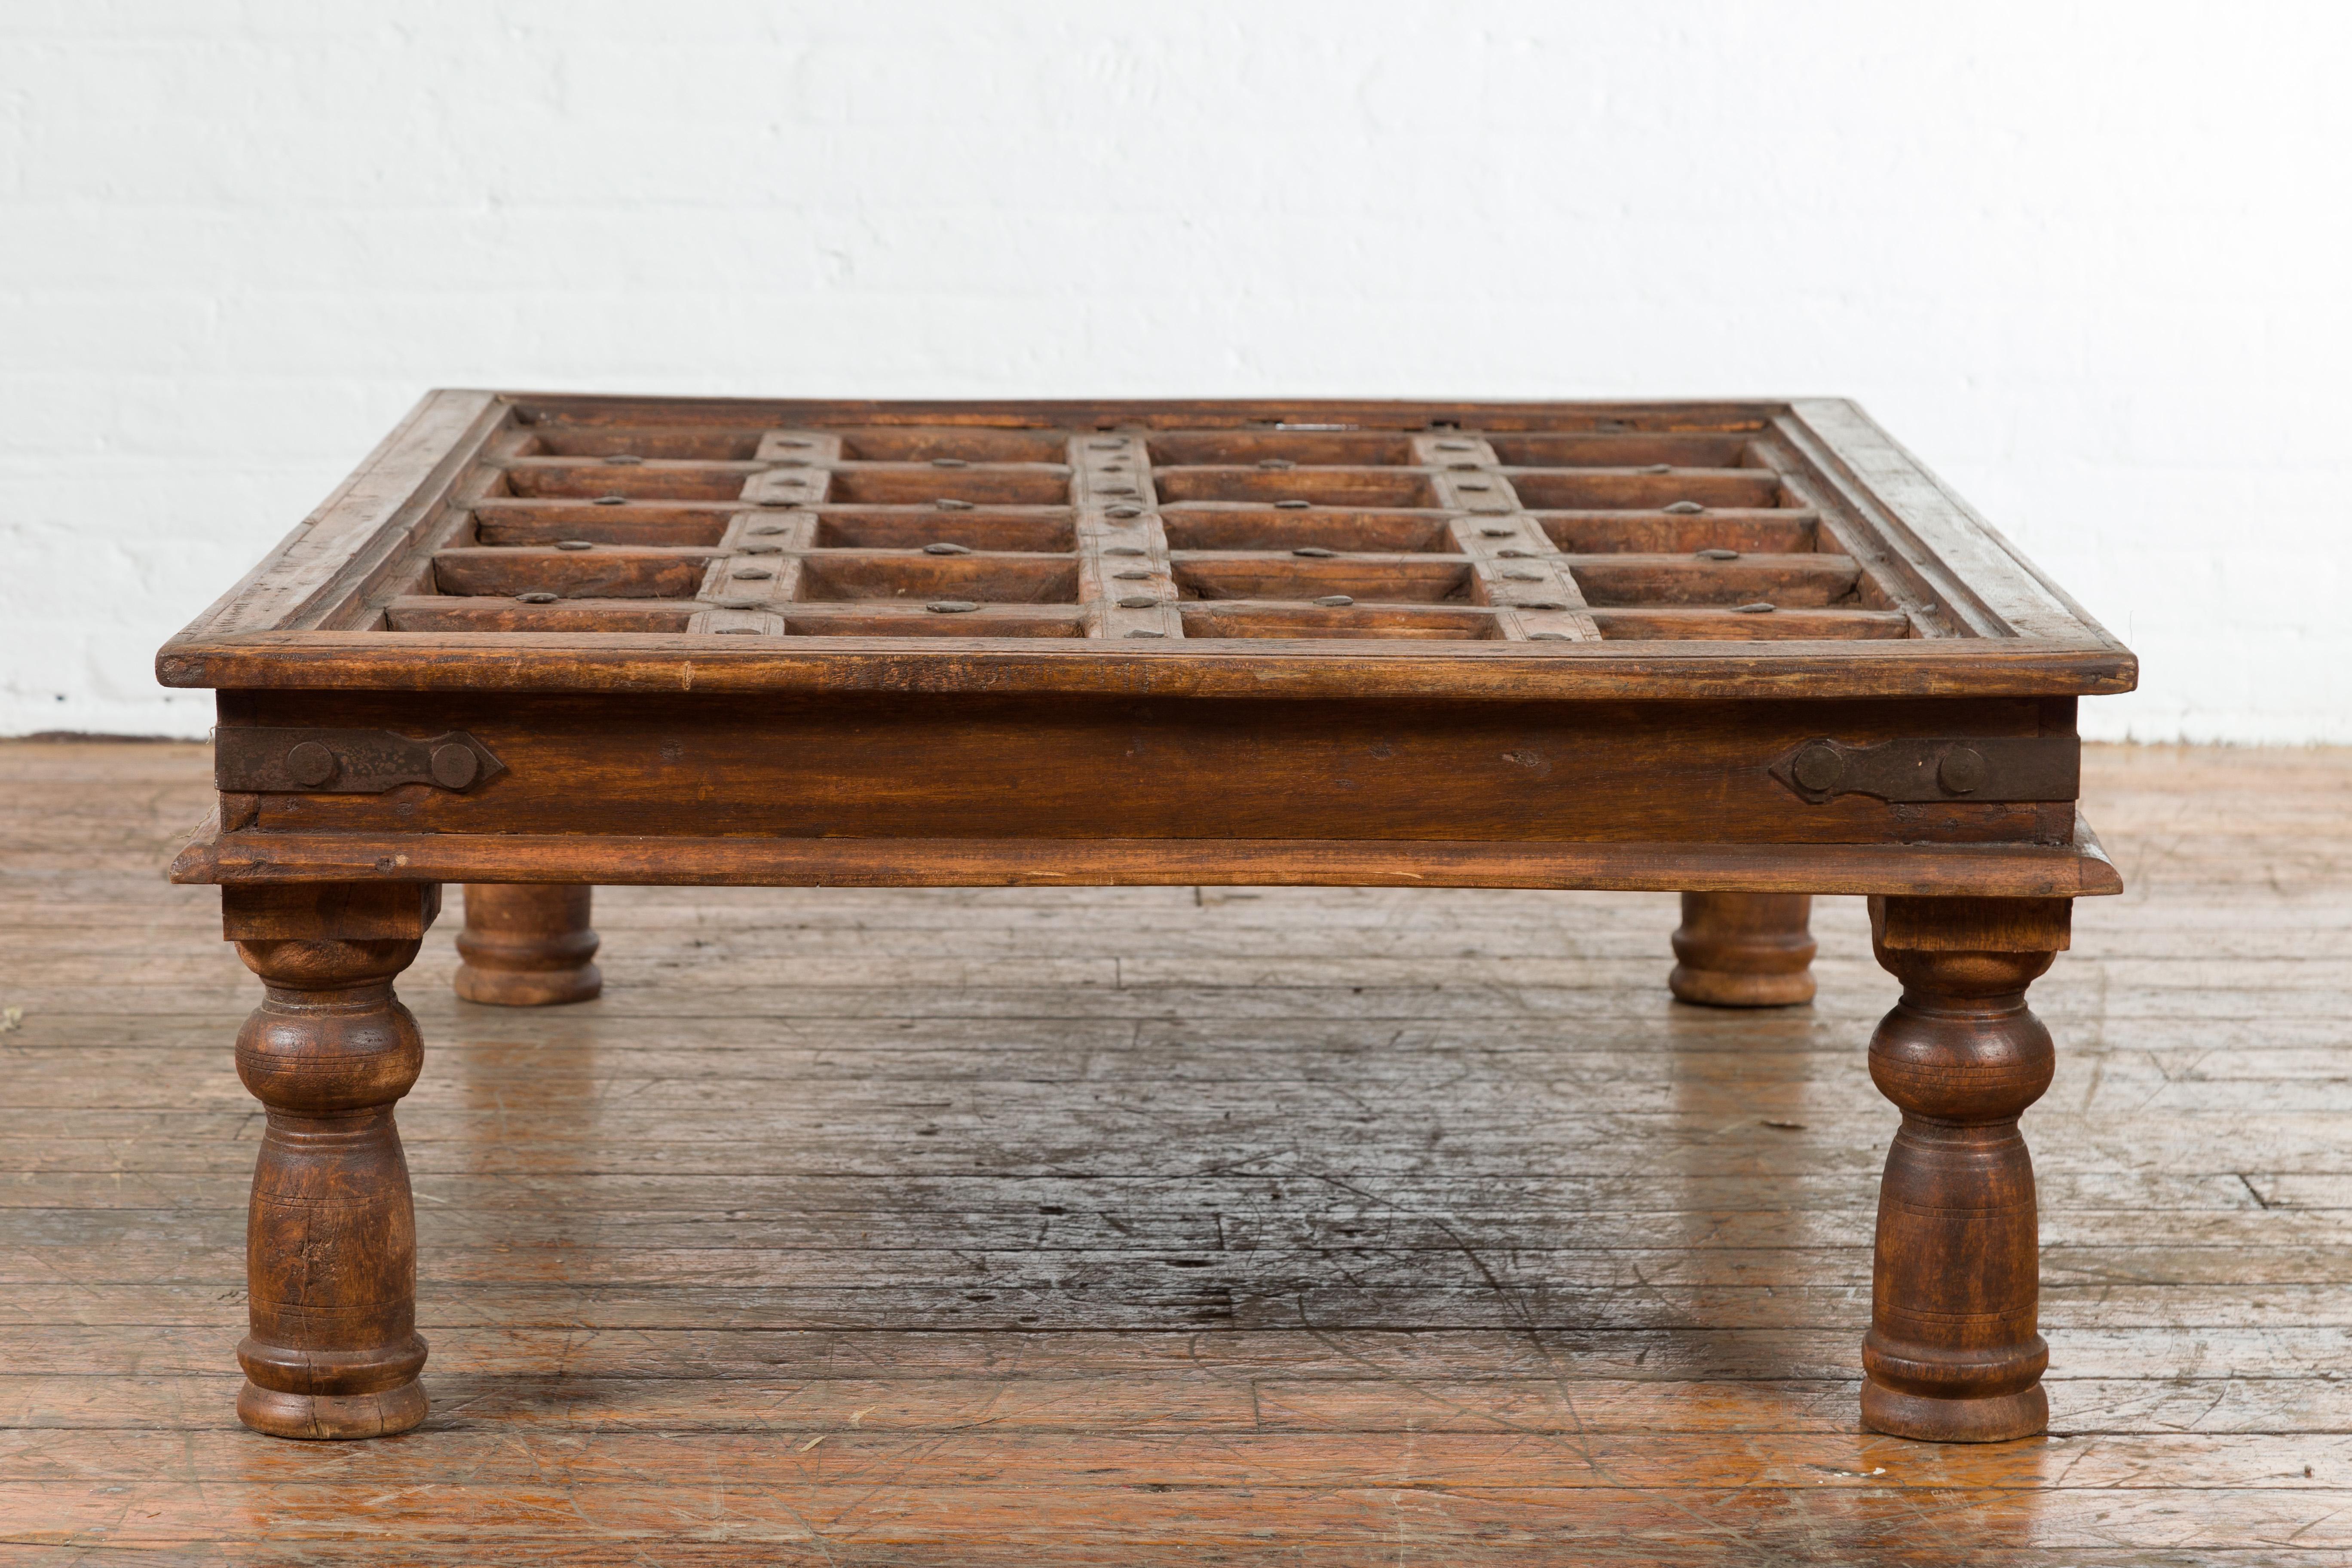 Indian 19th Century Paneled Door with Iron Accents Turned into a Coffee Table 5